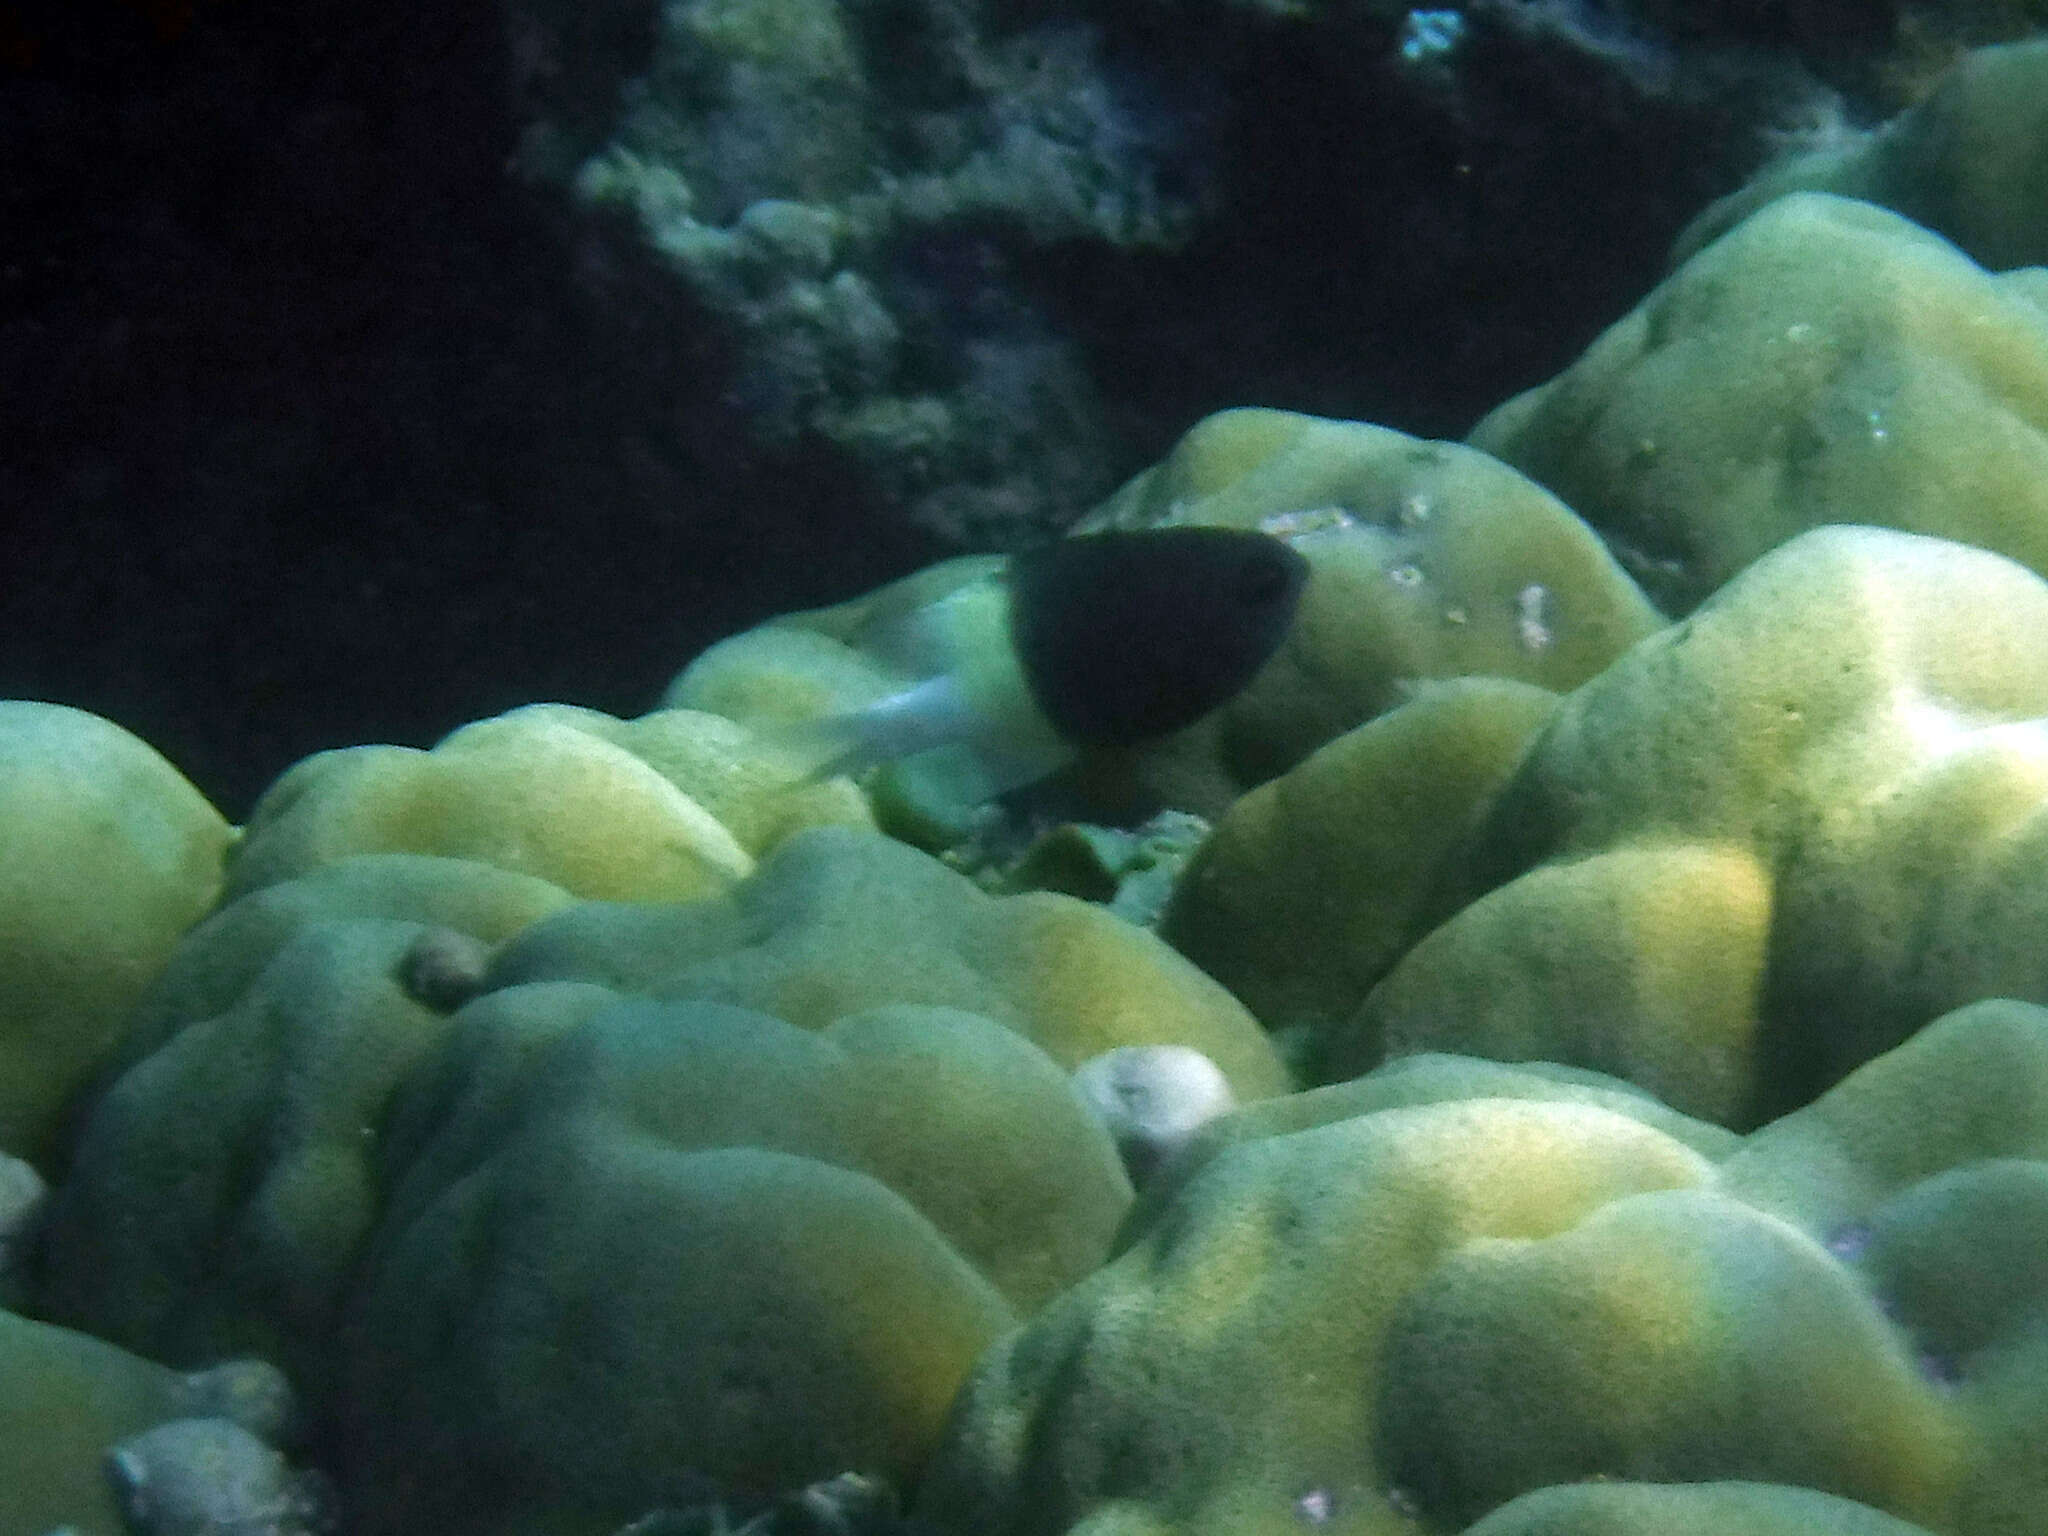 Image of Two-tone Chromis